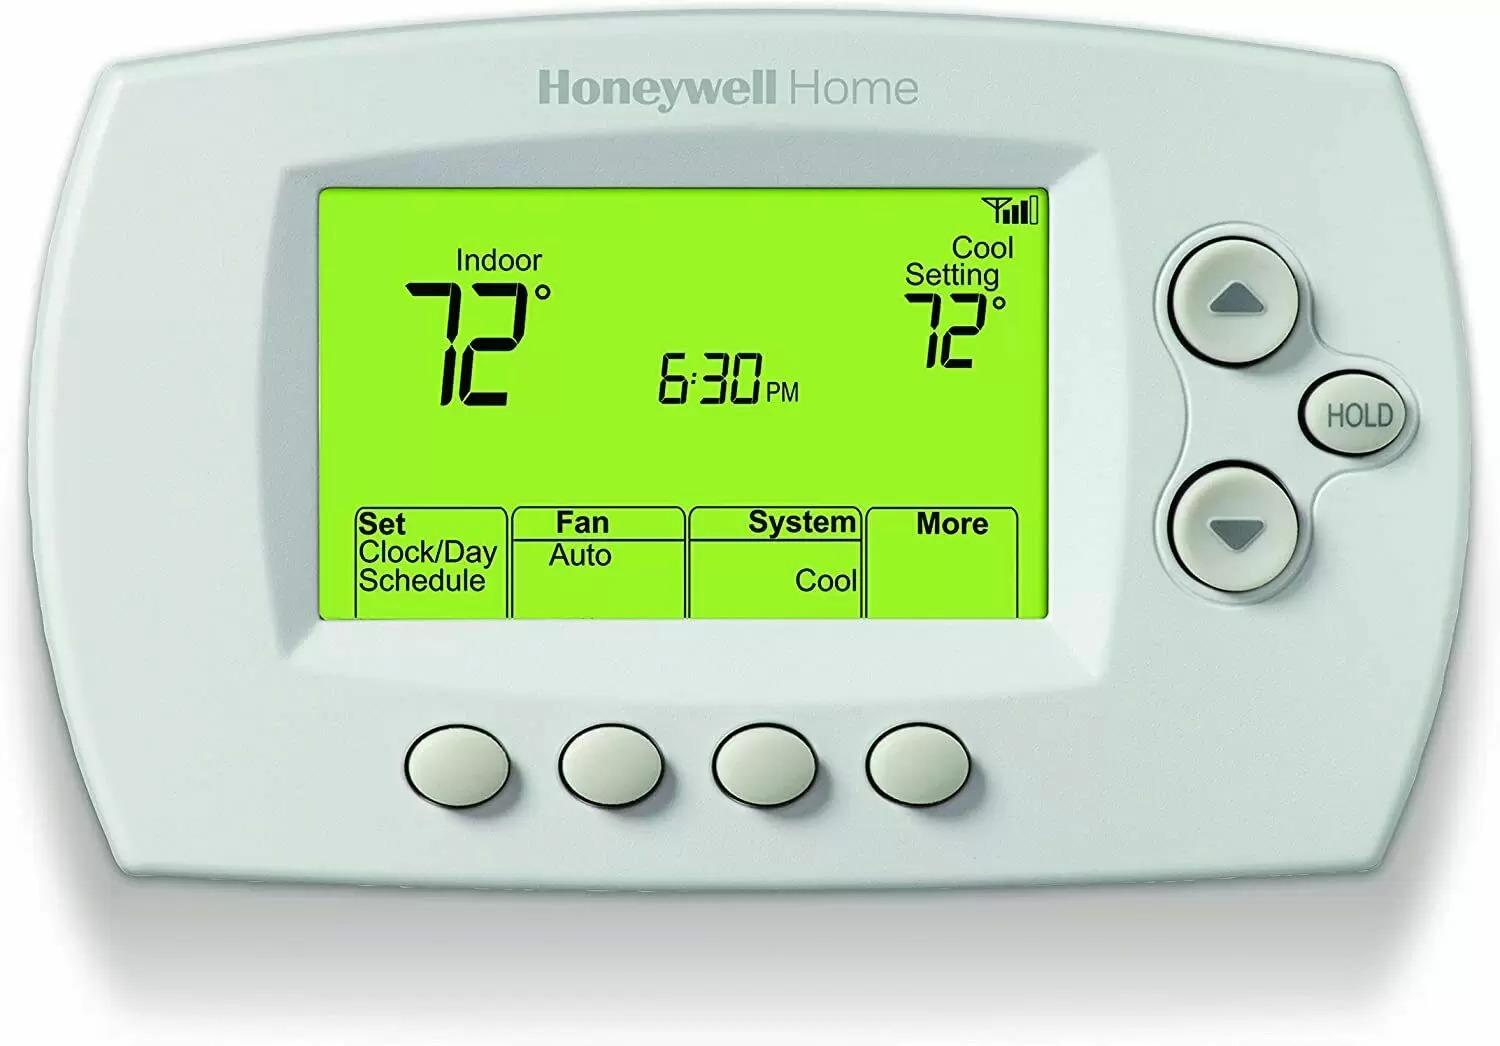 Honeywell Home Wi-Fi 7-Day Programmable Thermostat for $38.24 Shipped